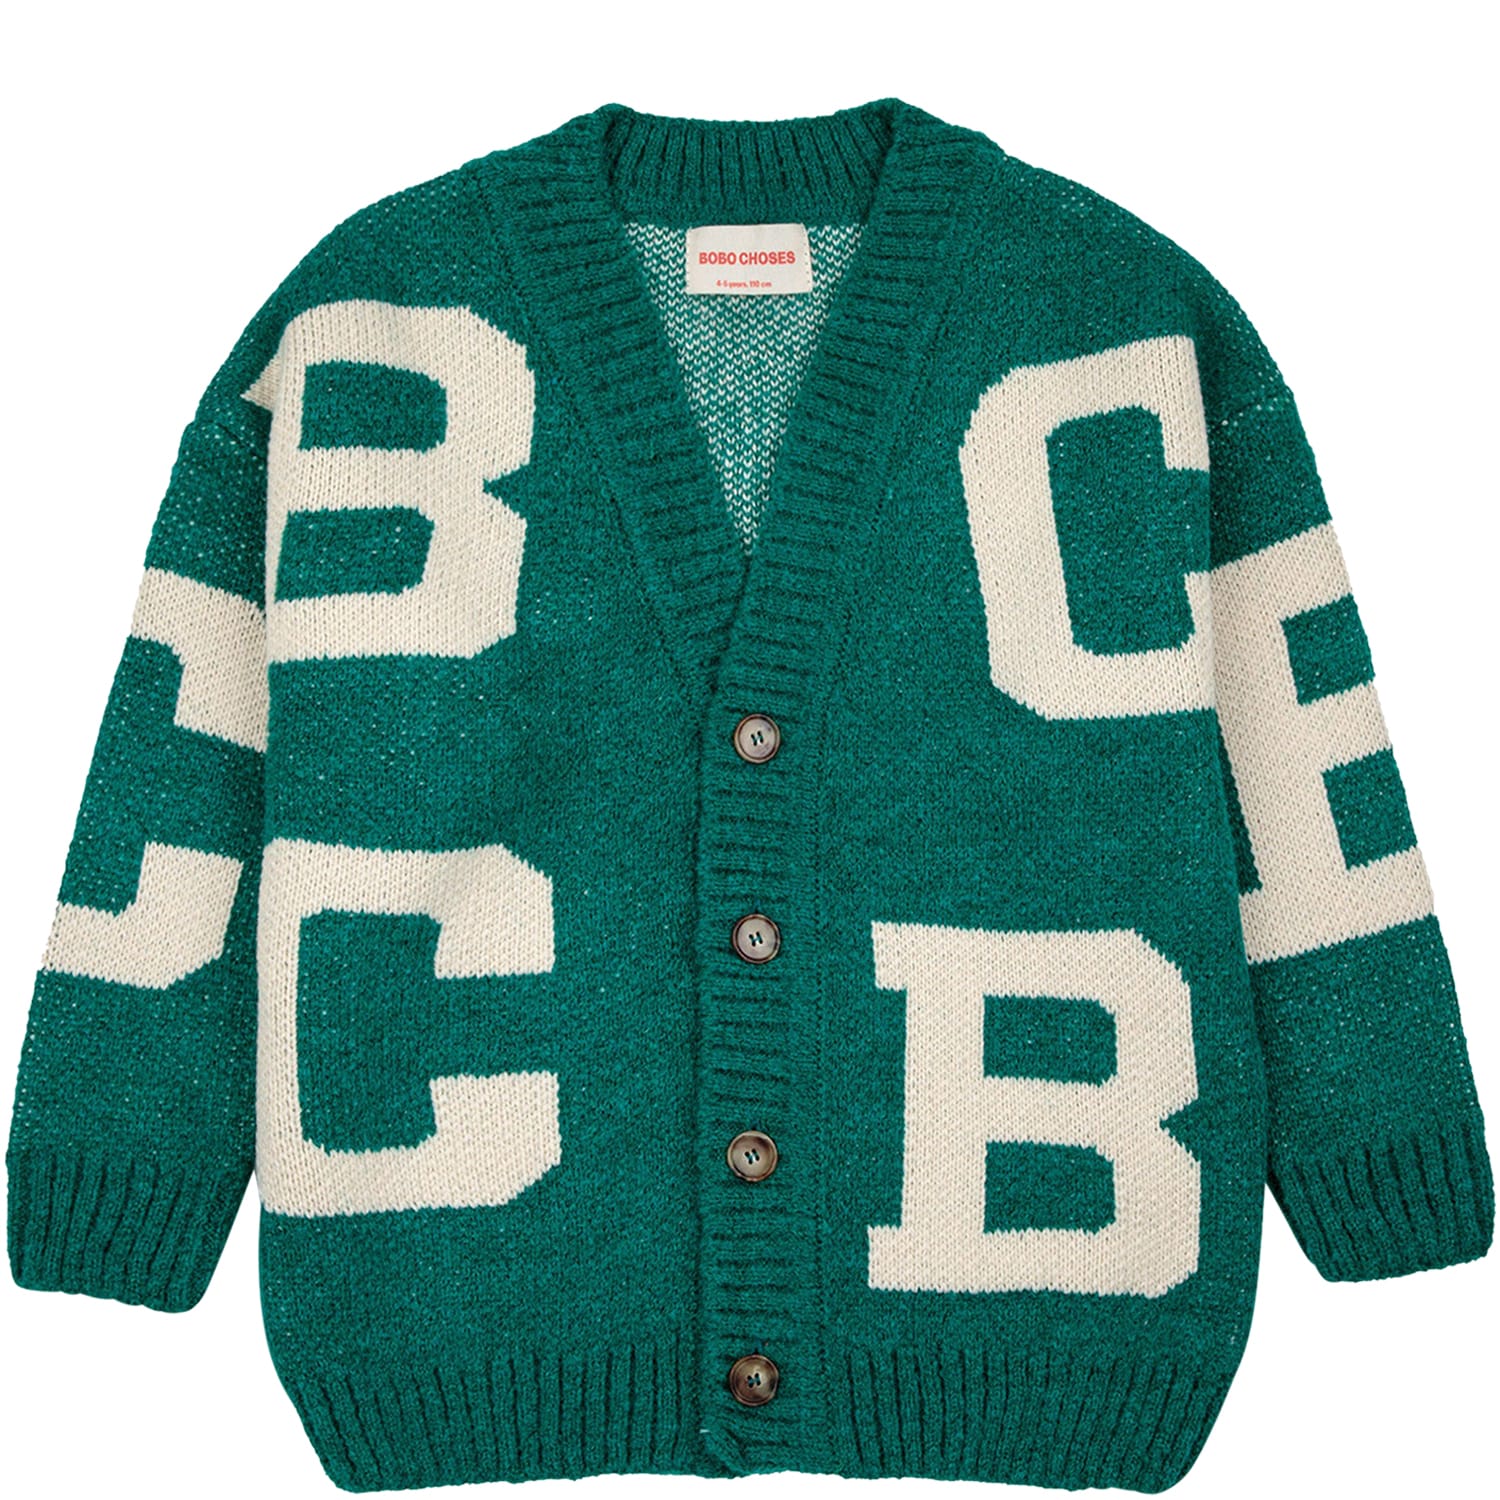 BOBO CHOSES GREEN CARDIGAN FOR KIDS WITH JACQUARD